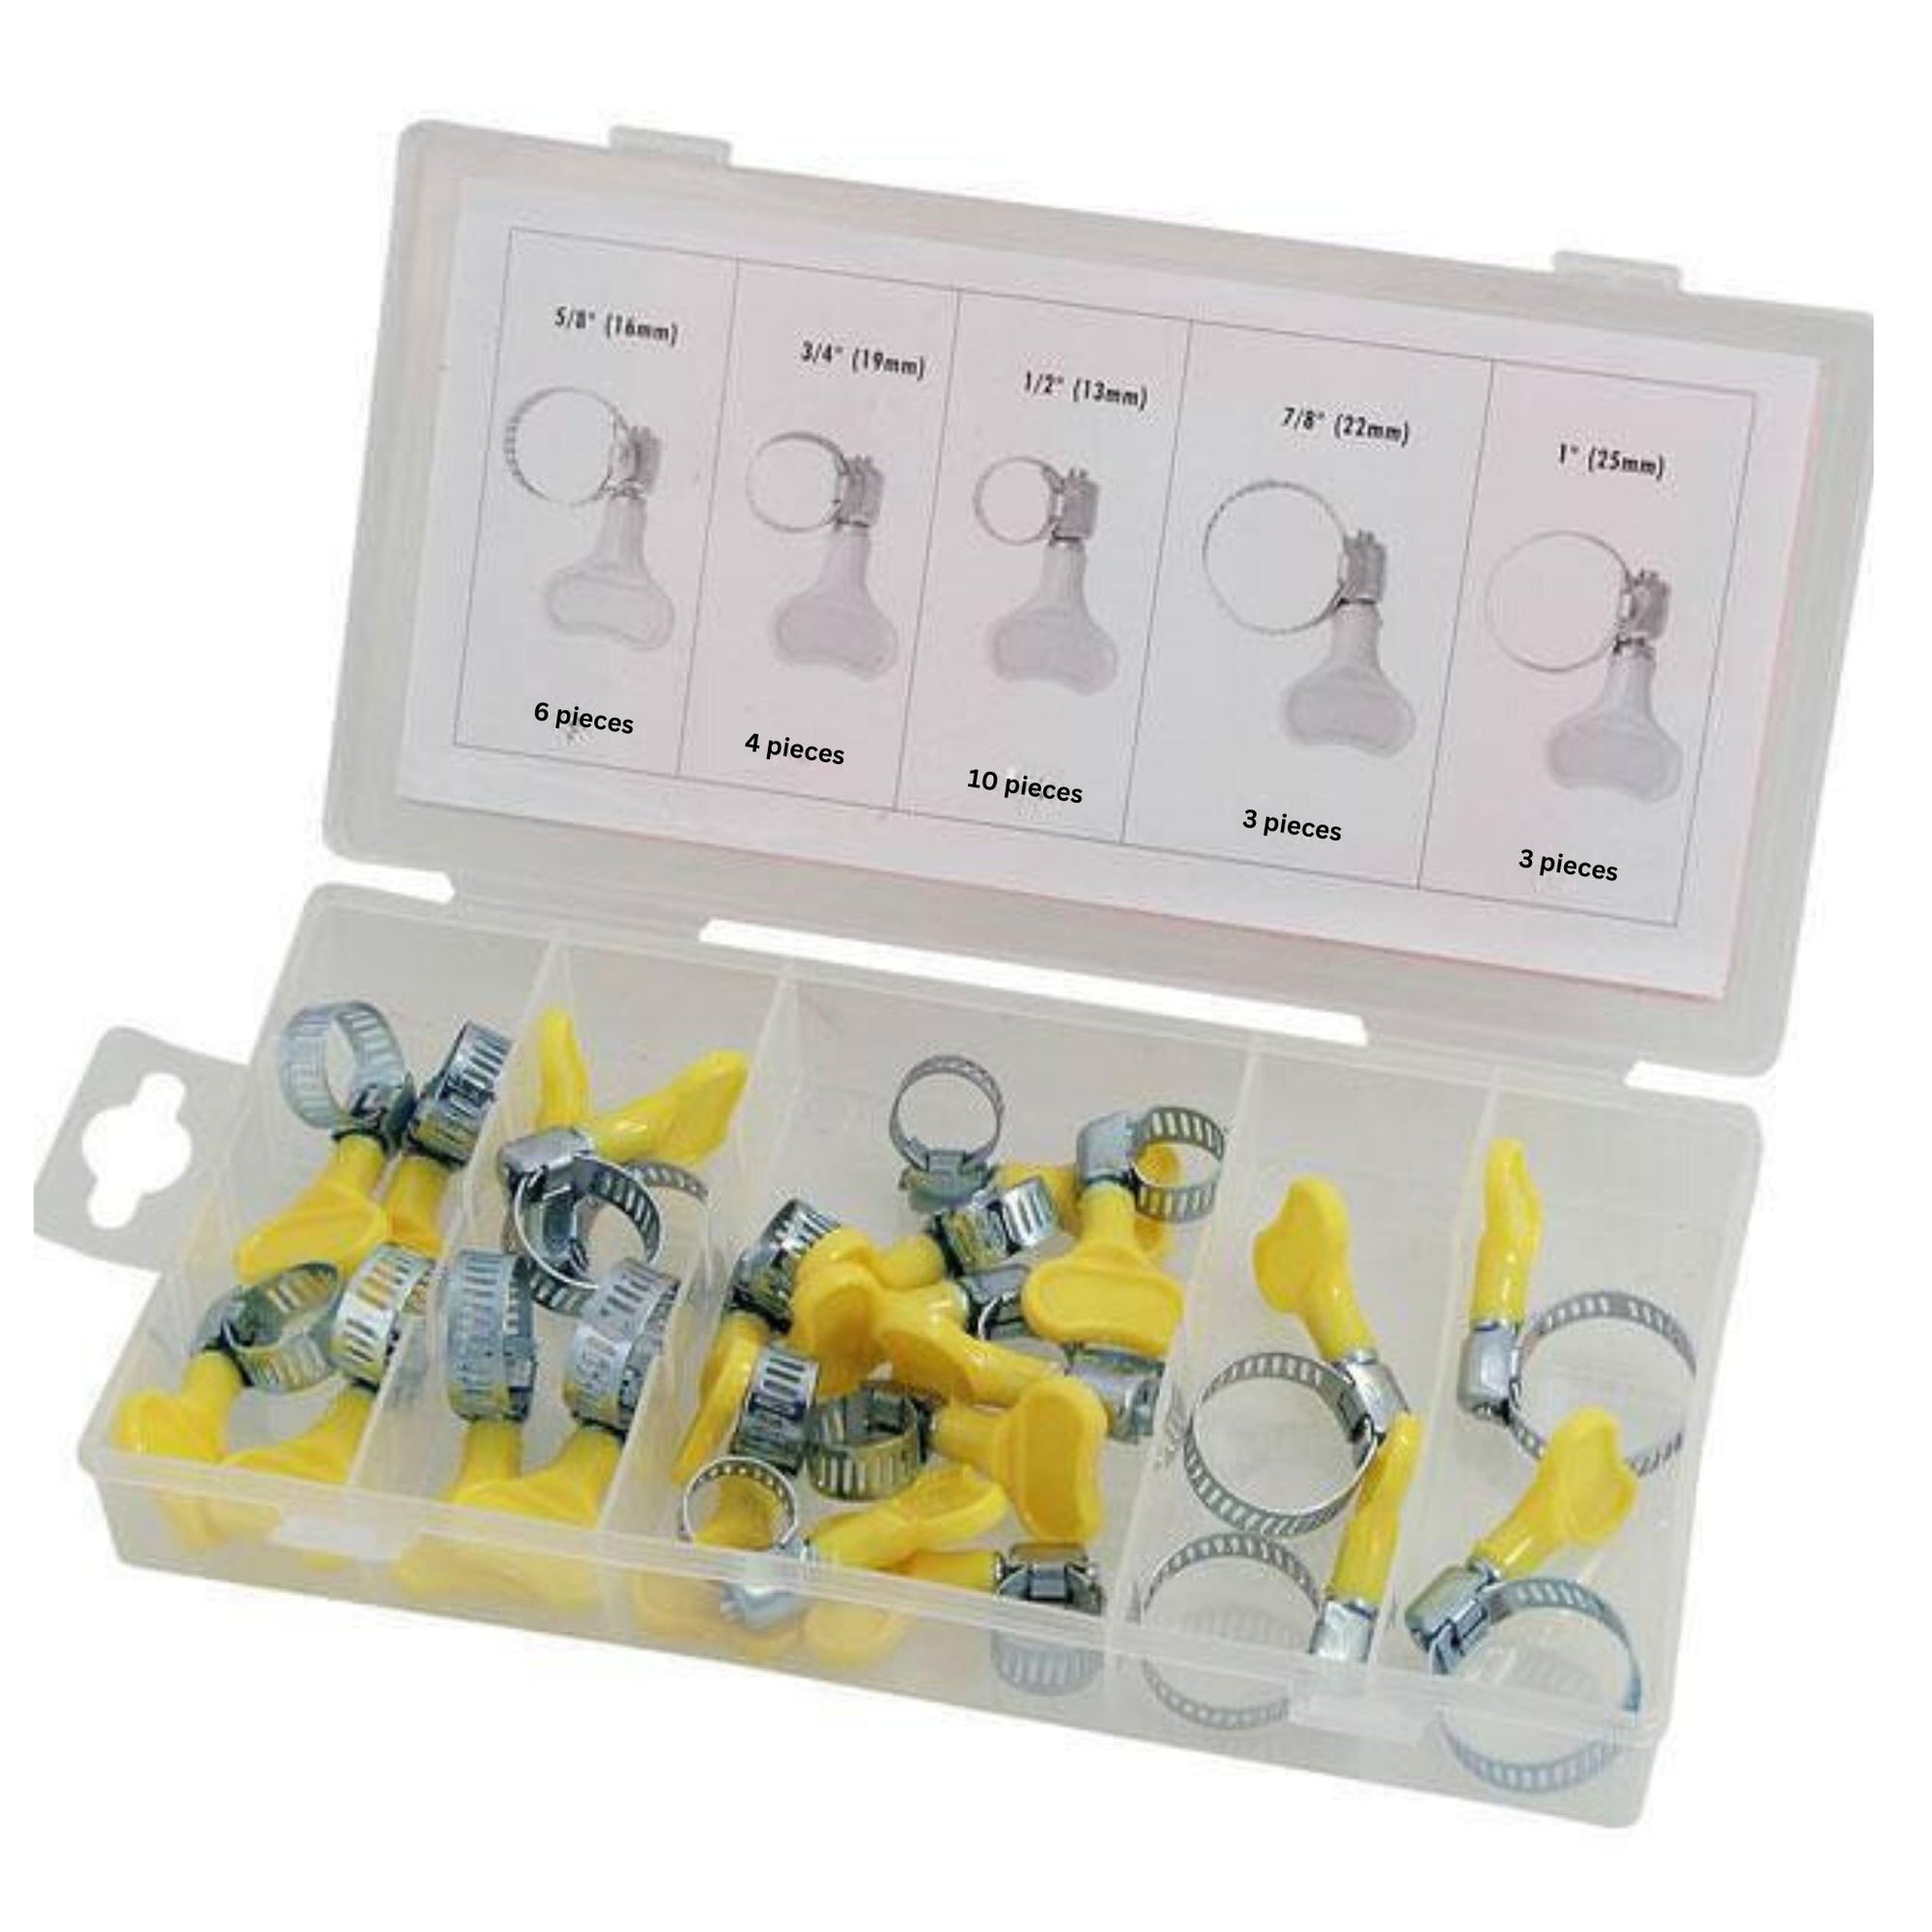 26 Piece Key Type Hose Clamp Assortment Kit - South East Clearance Centre